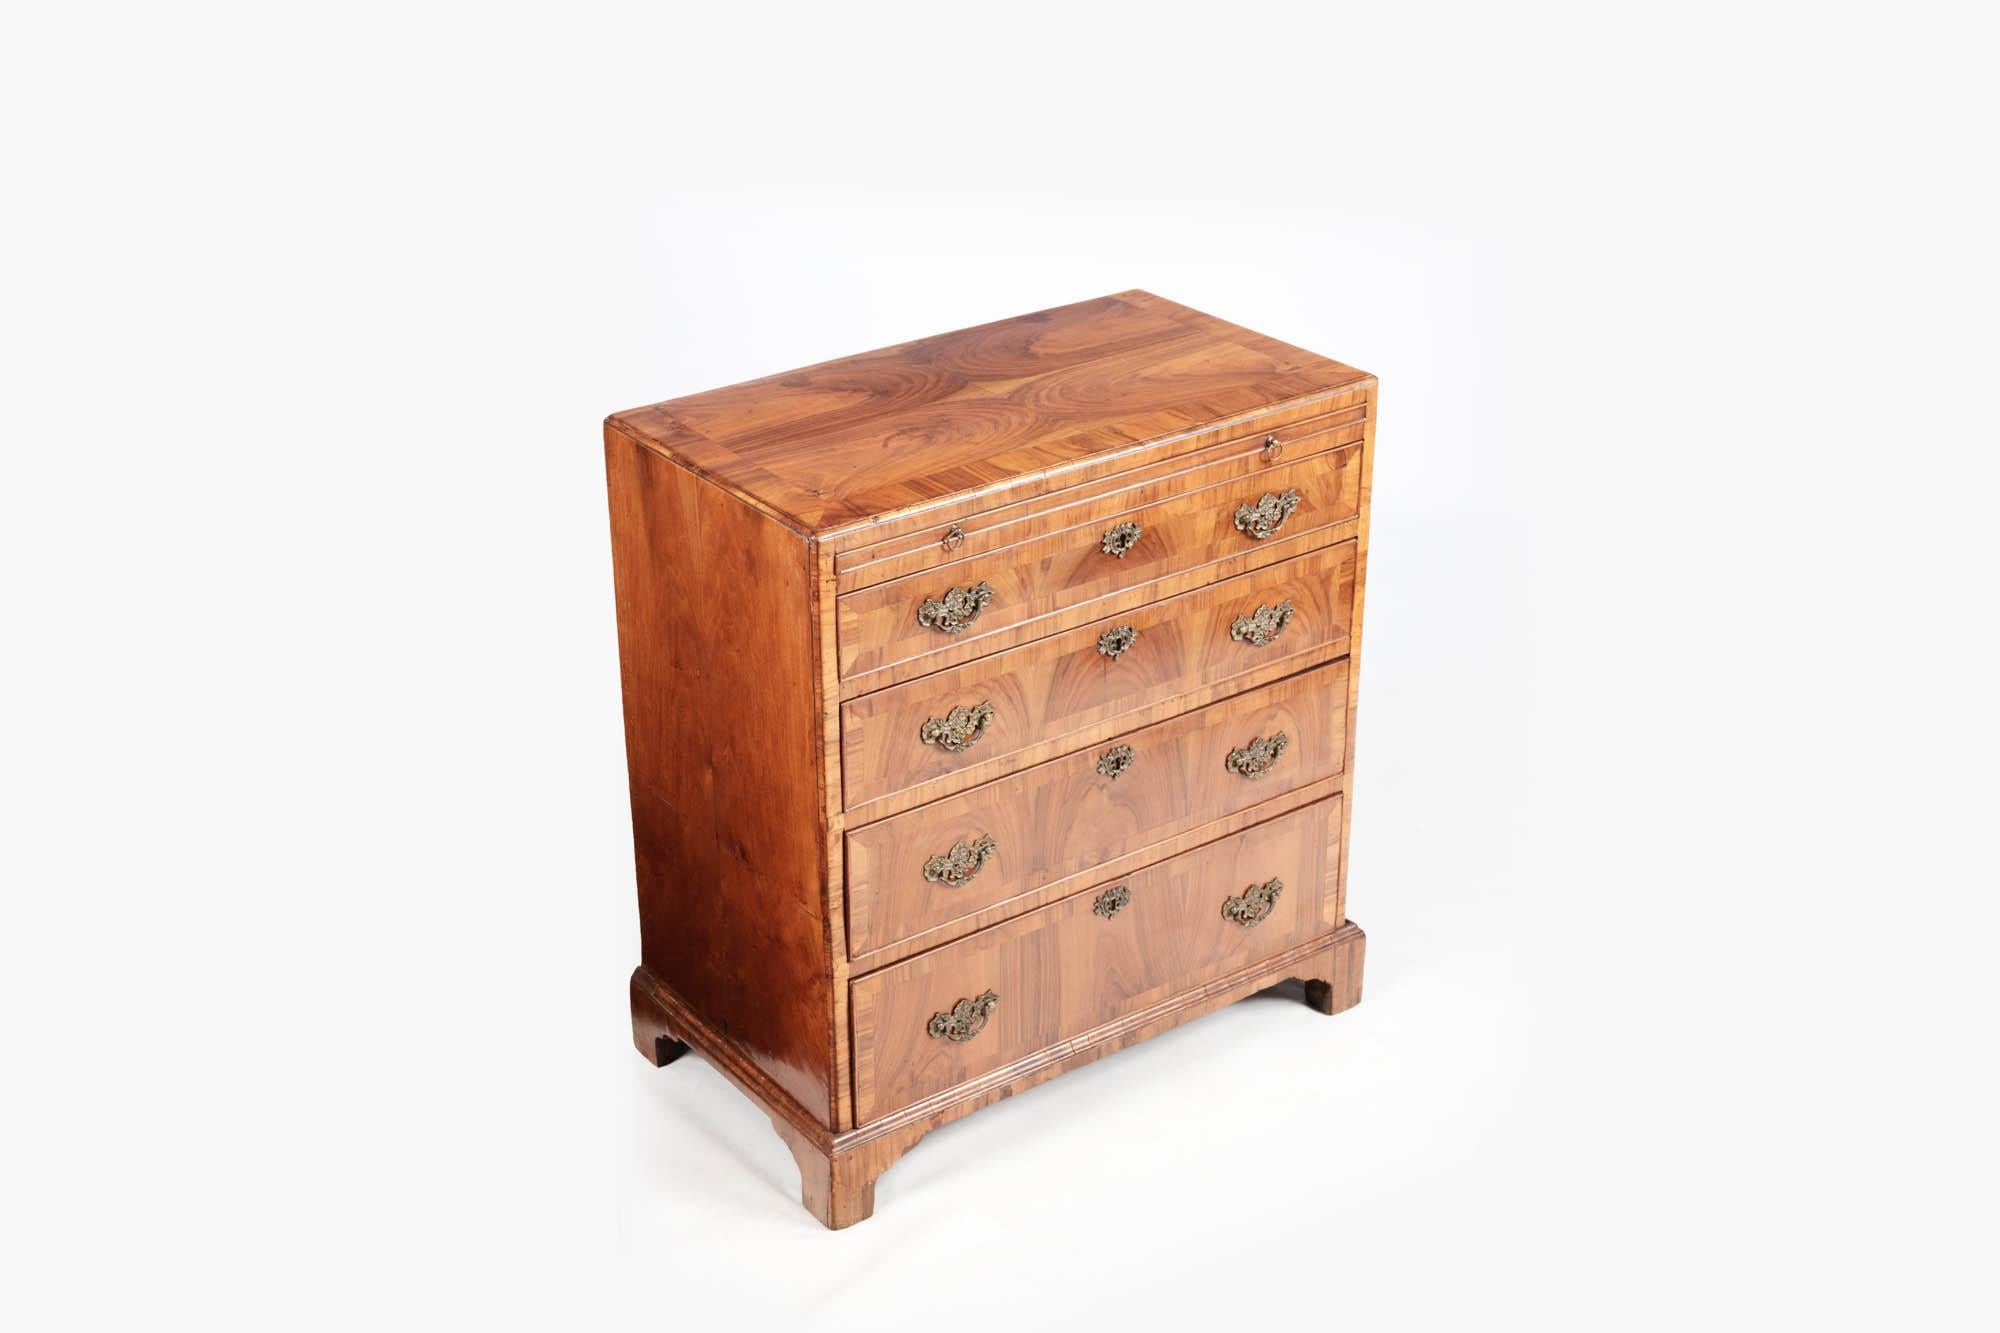 18th Century walnut bachelor's chest with four full drawers and pull-out writing slide and original handles. It is supported on ogee bracket feet.